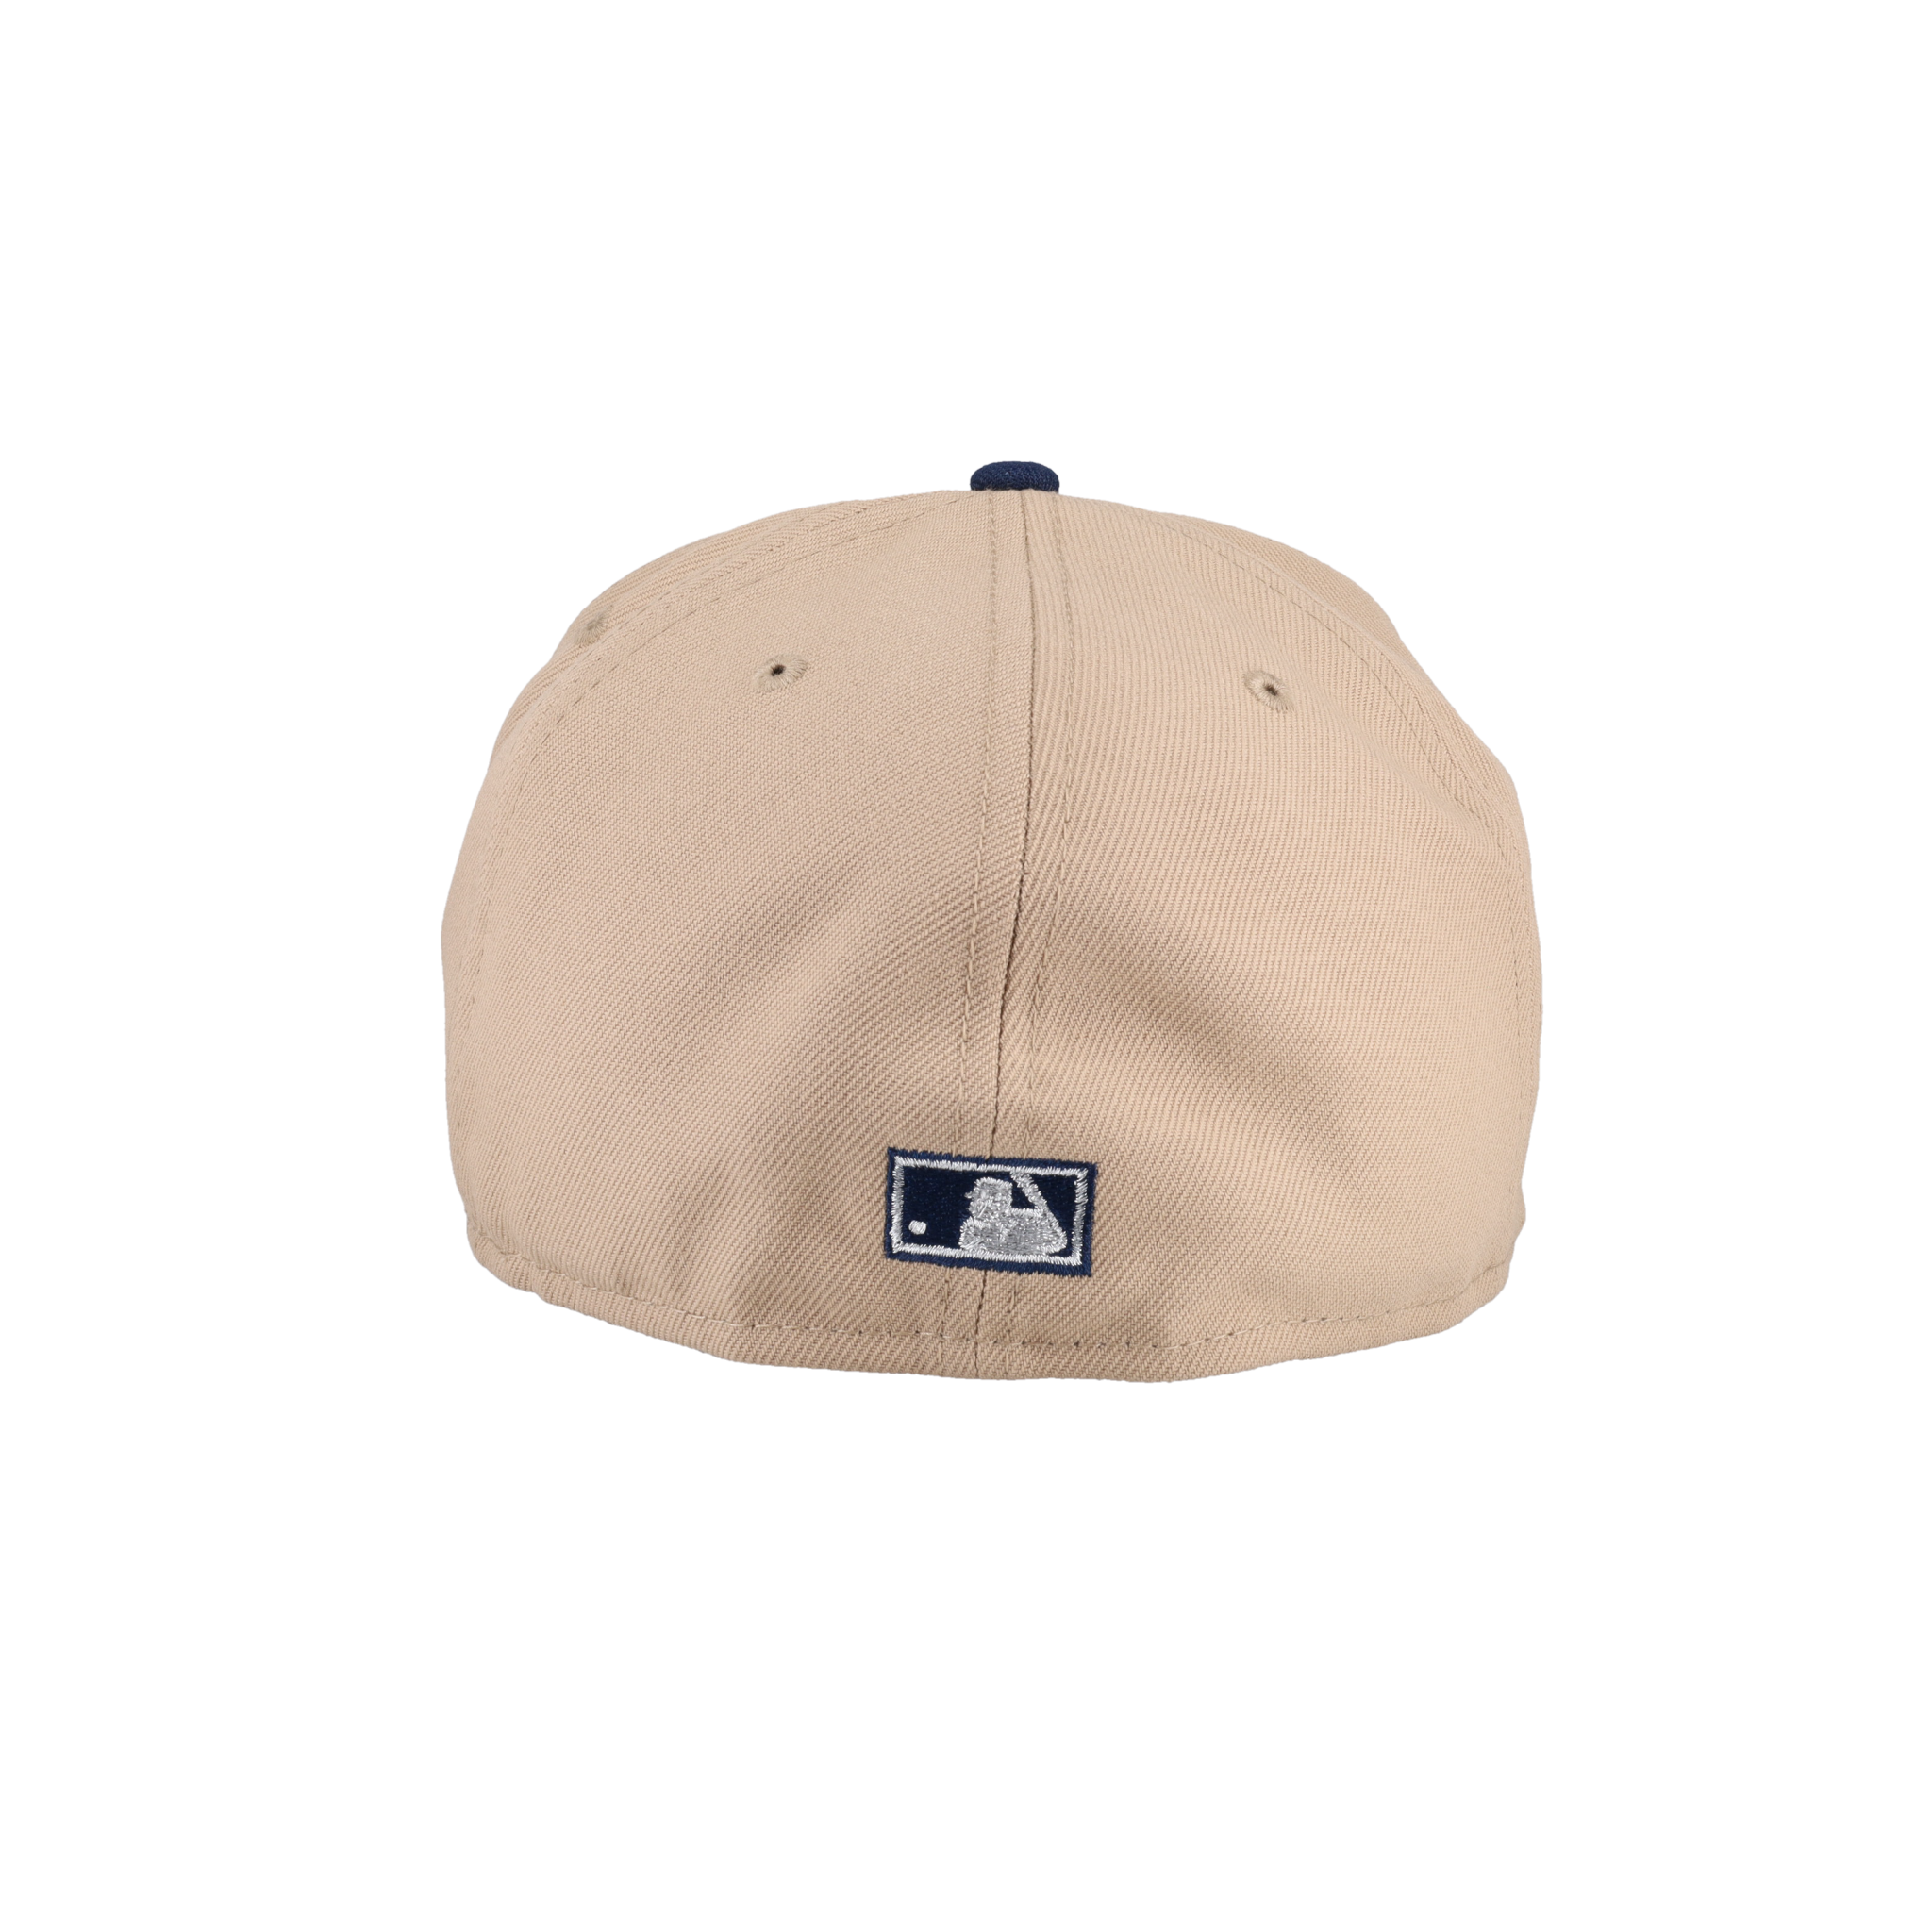 Cleveland Indians Tan Inaugural Season Patch 59Fifty Fitted Hat